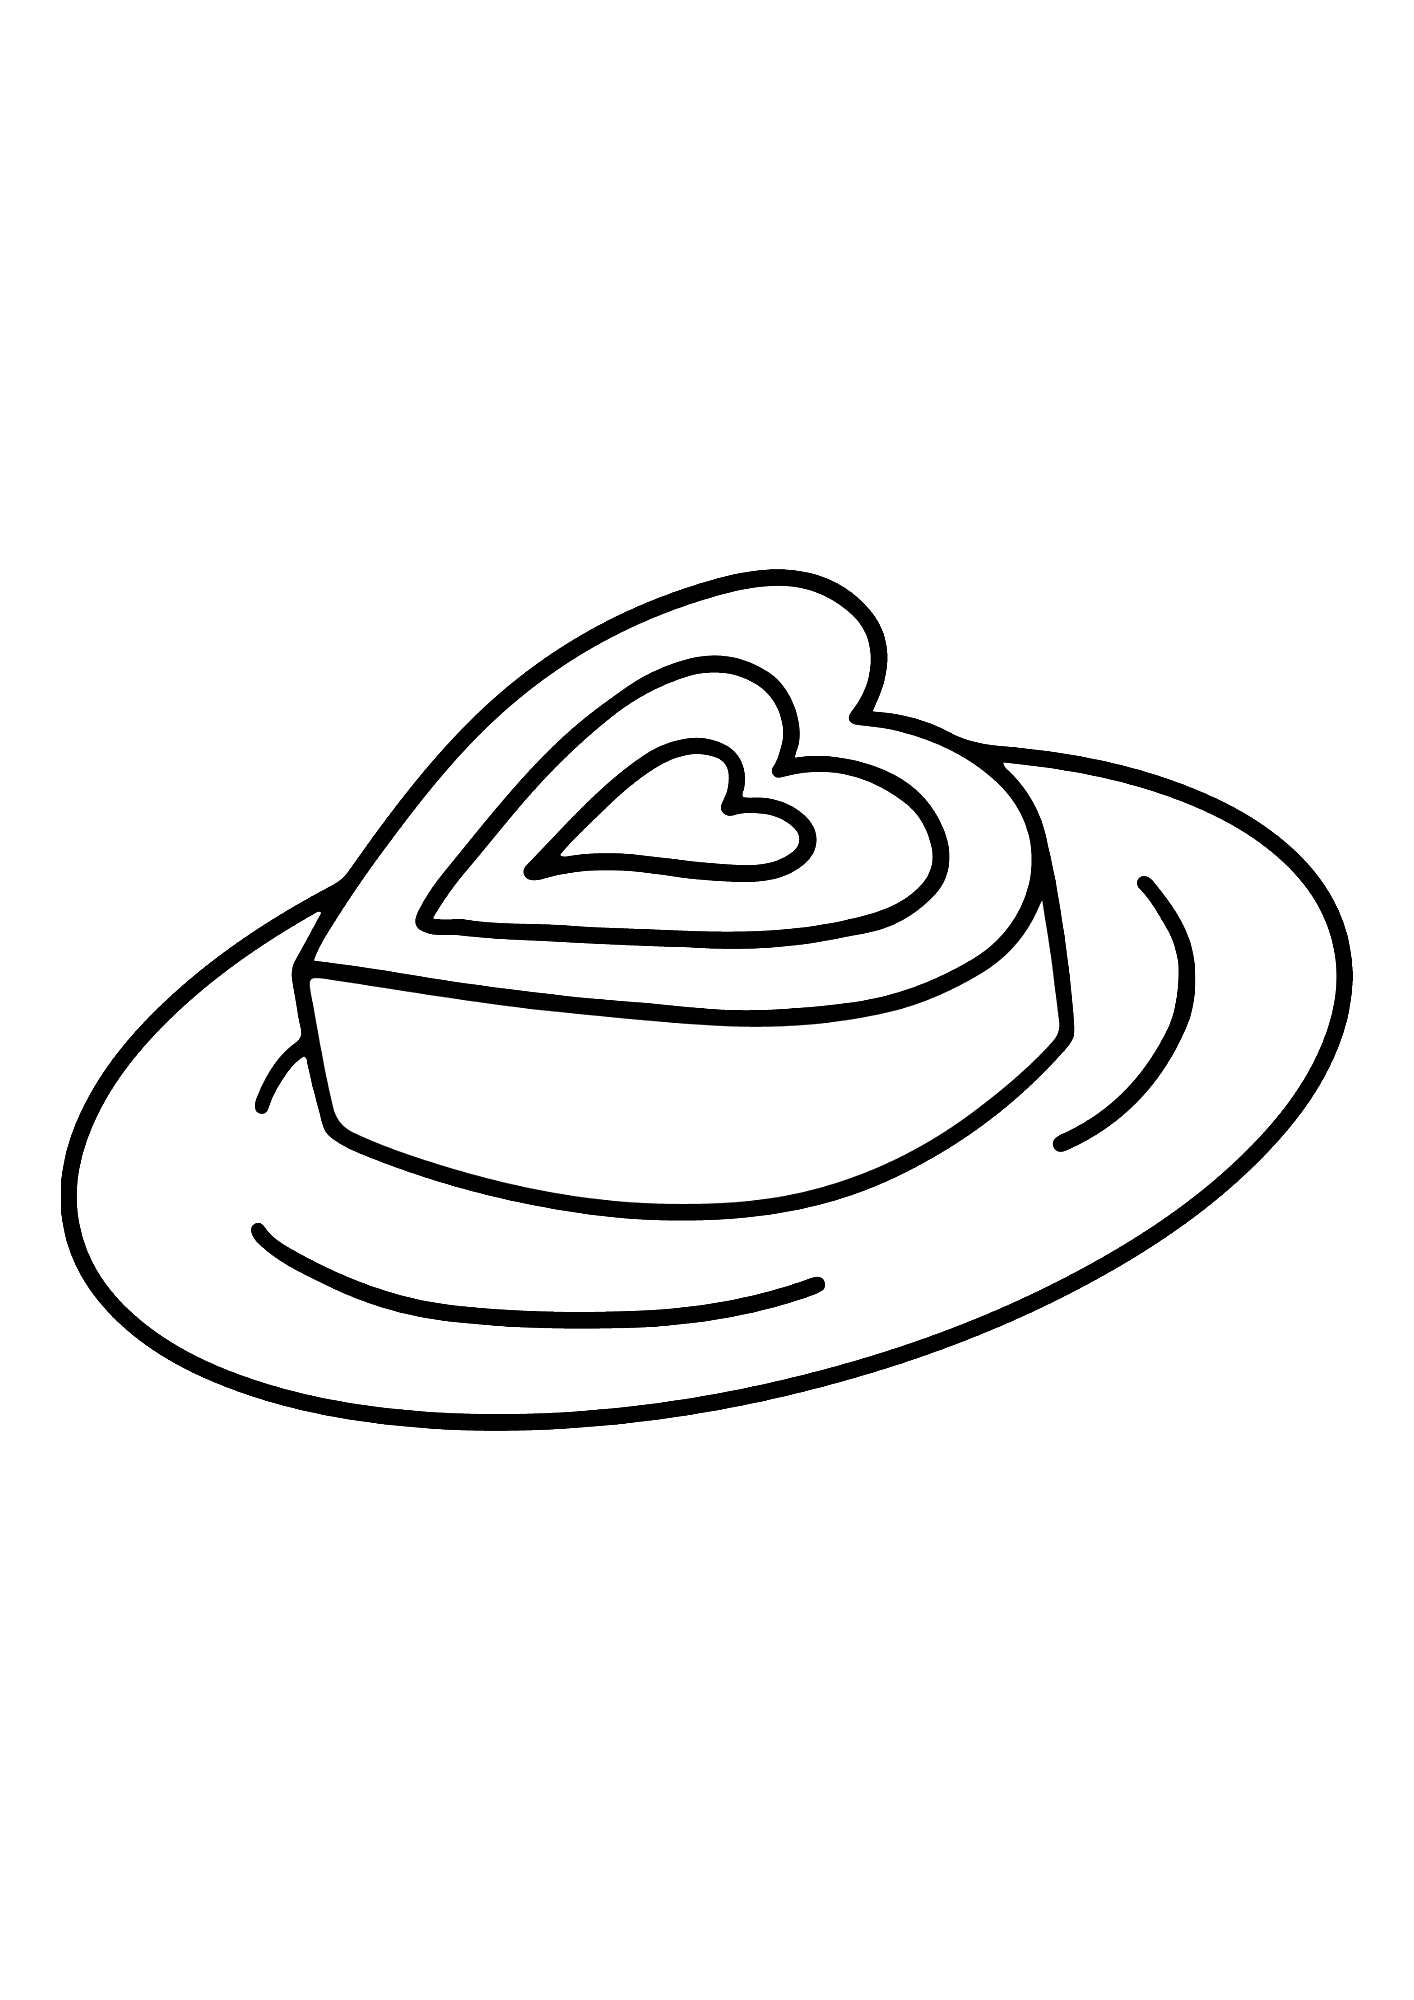 Cake Valentin's Day Coloring Page